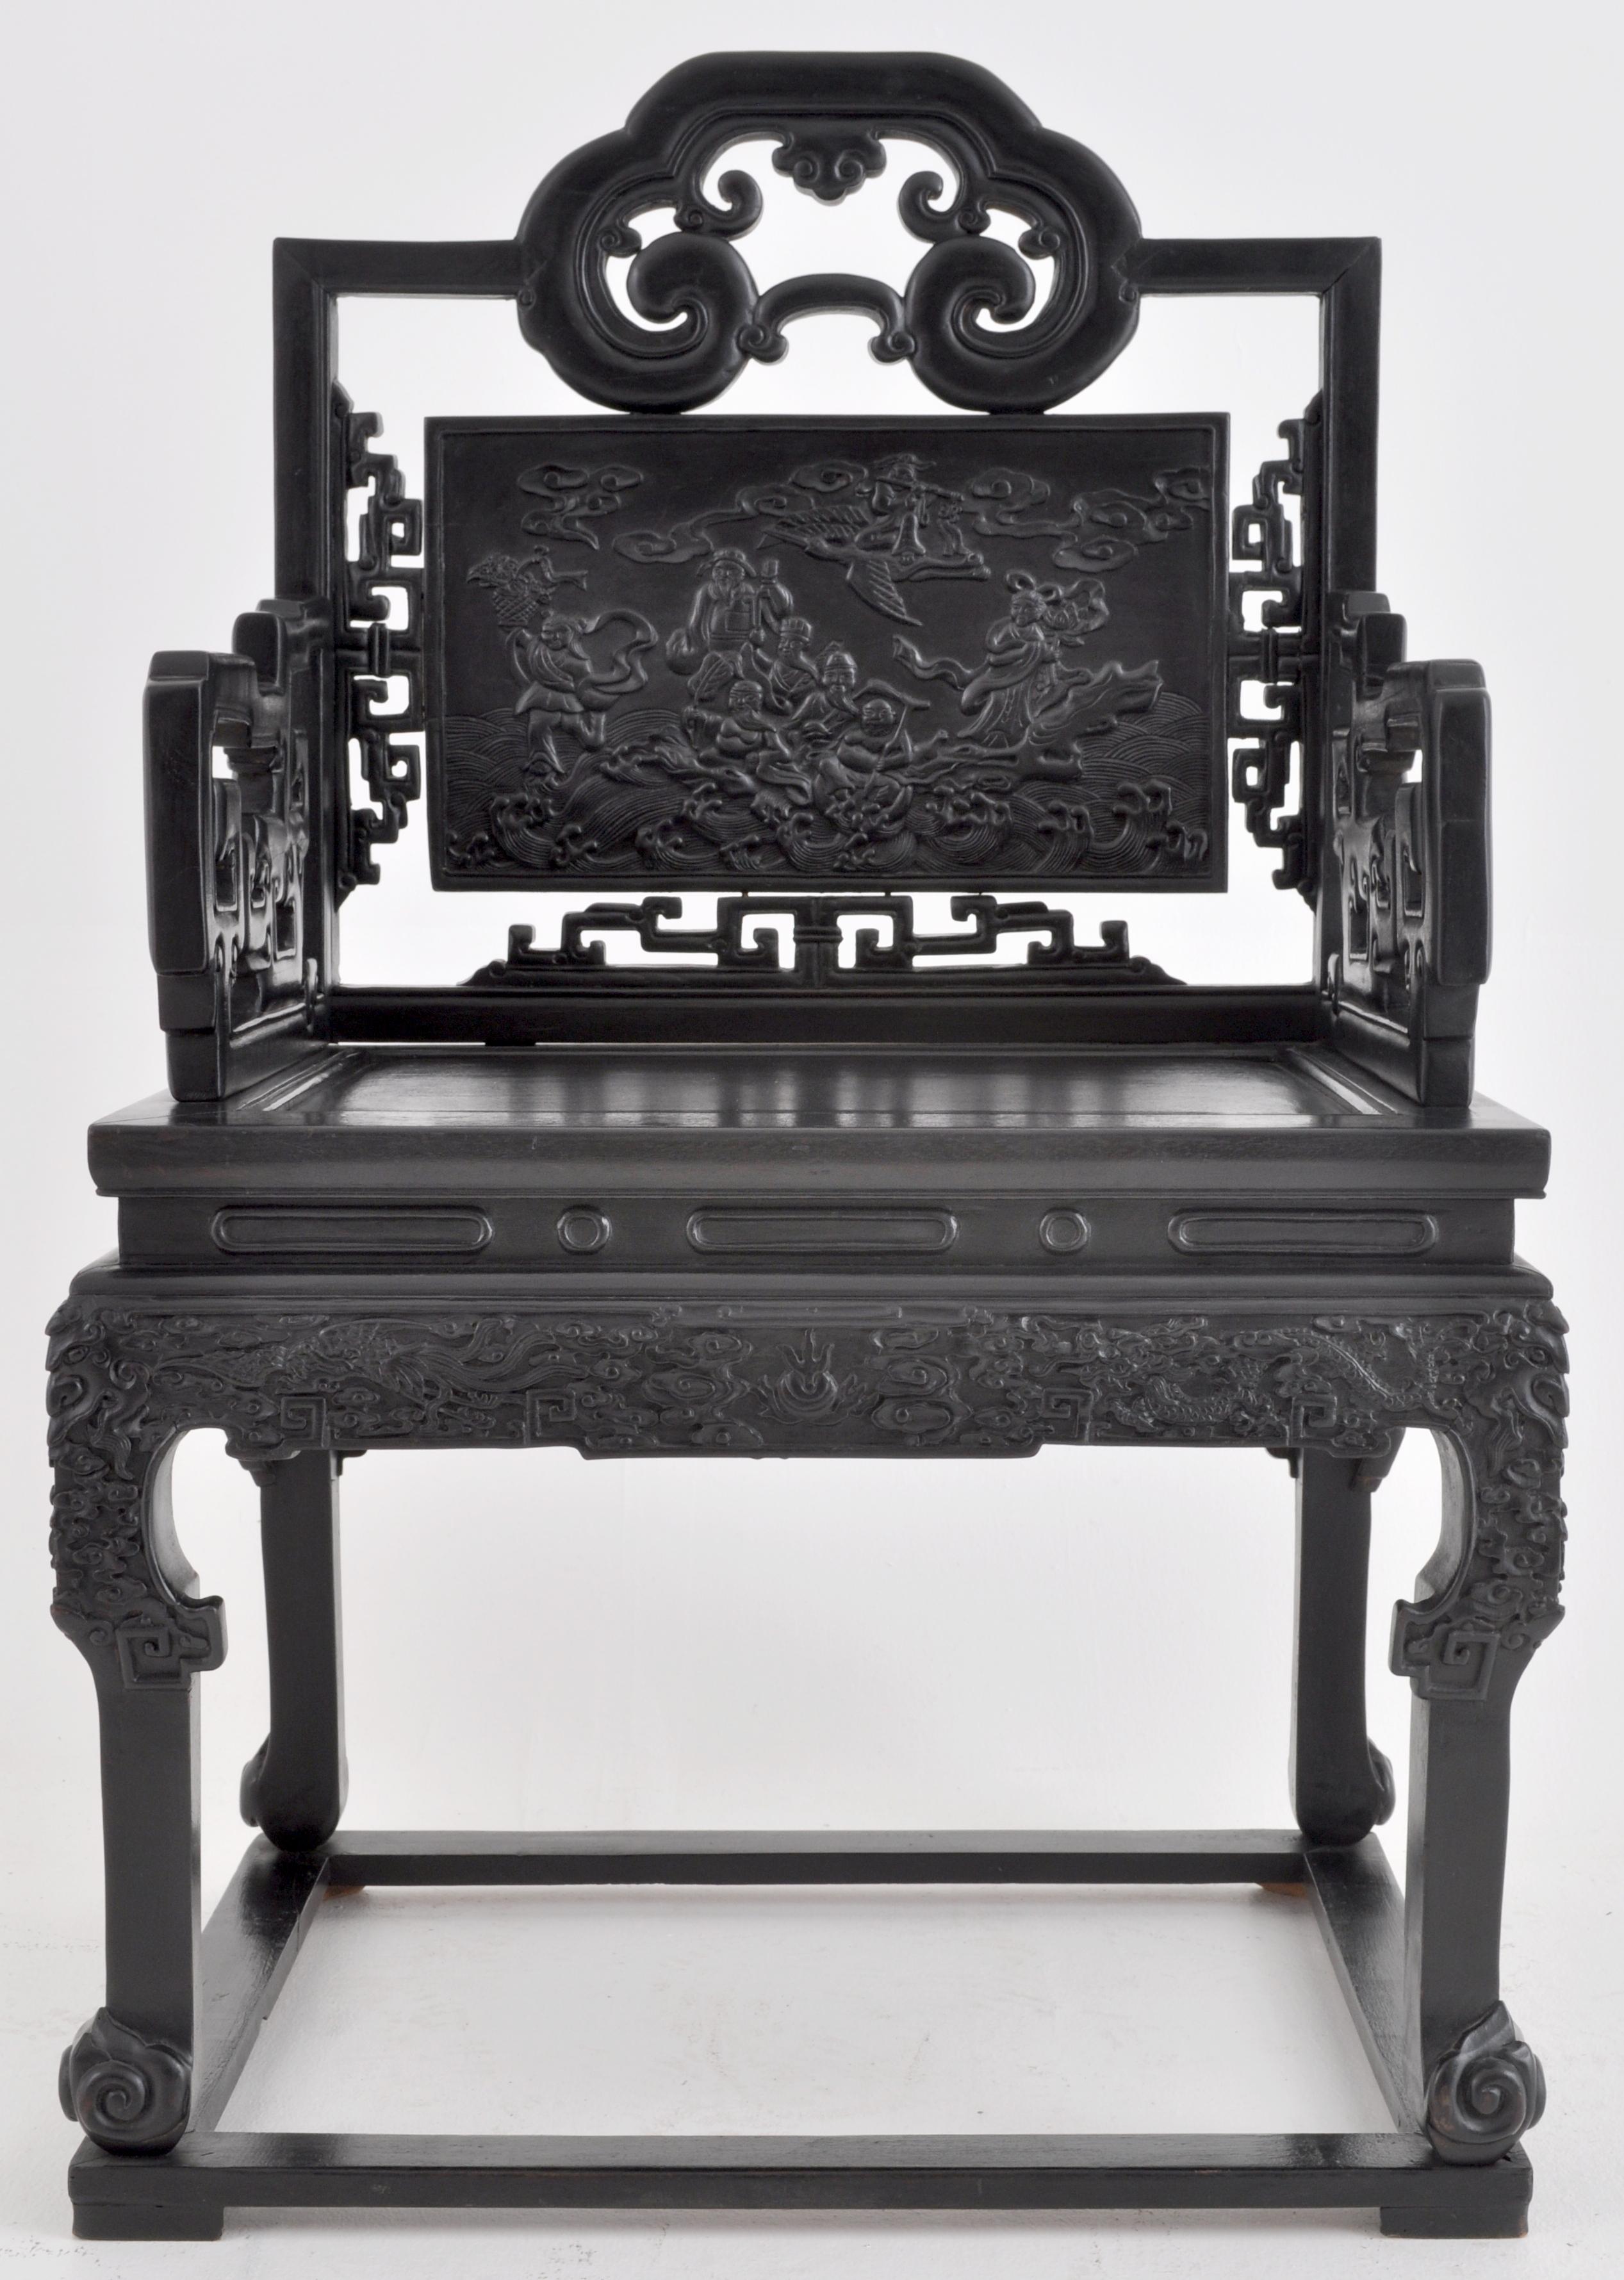 Antique 19th century Chinese Qing Dynasty carved ebonized rosewood chair, circa 1890. The chair having a tablet-shaped backsplat decorated with Chinese immortals in a cloudscape surrounded by mythical beasts. The arms having reticulated and scrolled